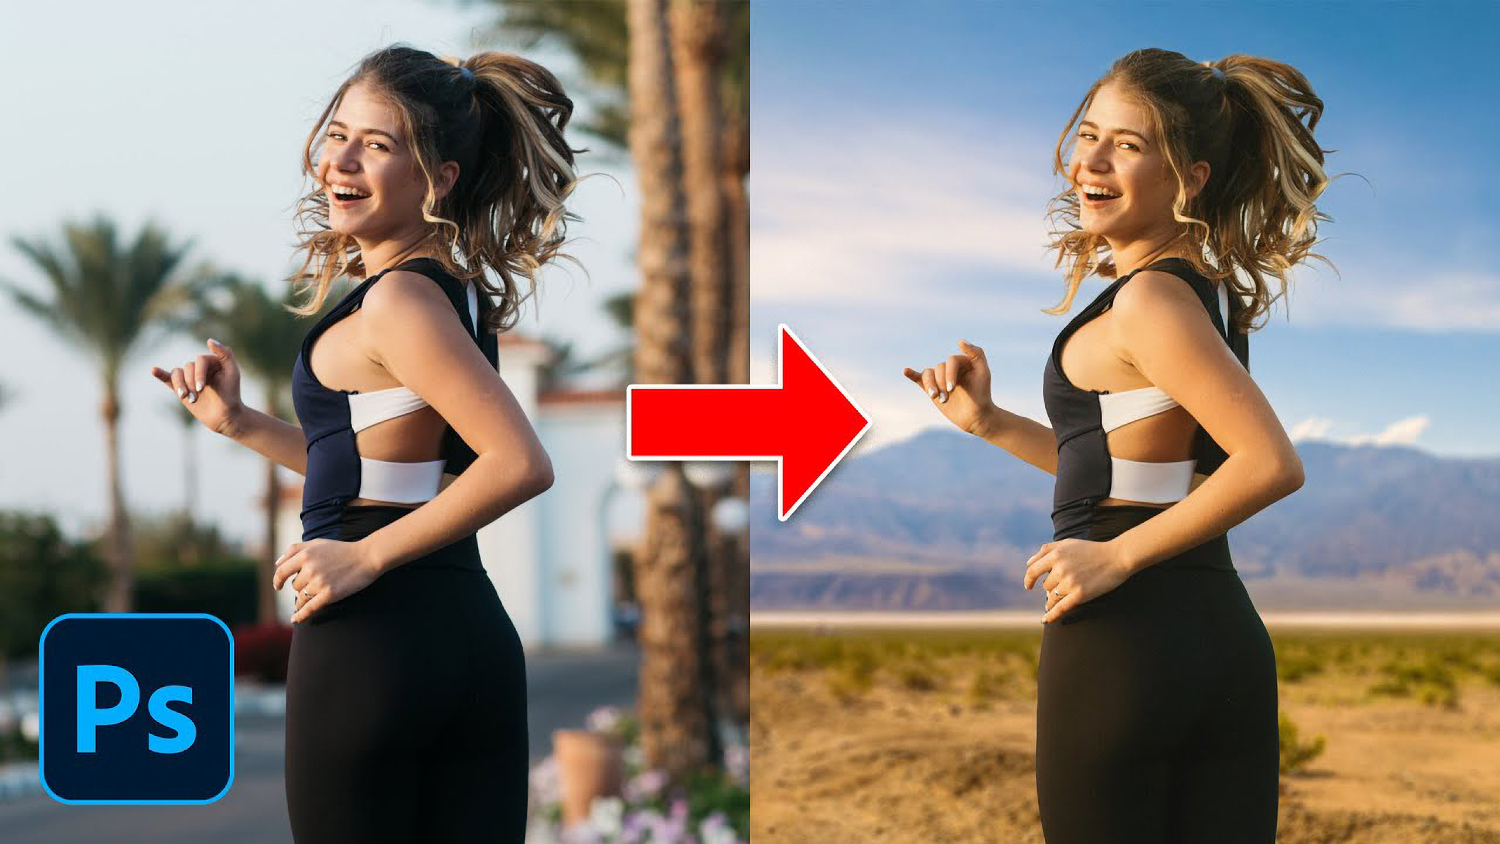 How to Change the Background on a Photo